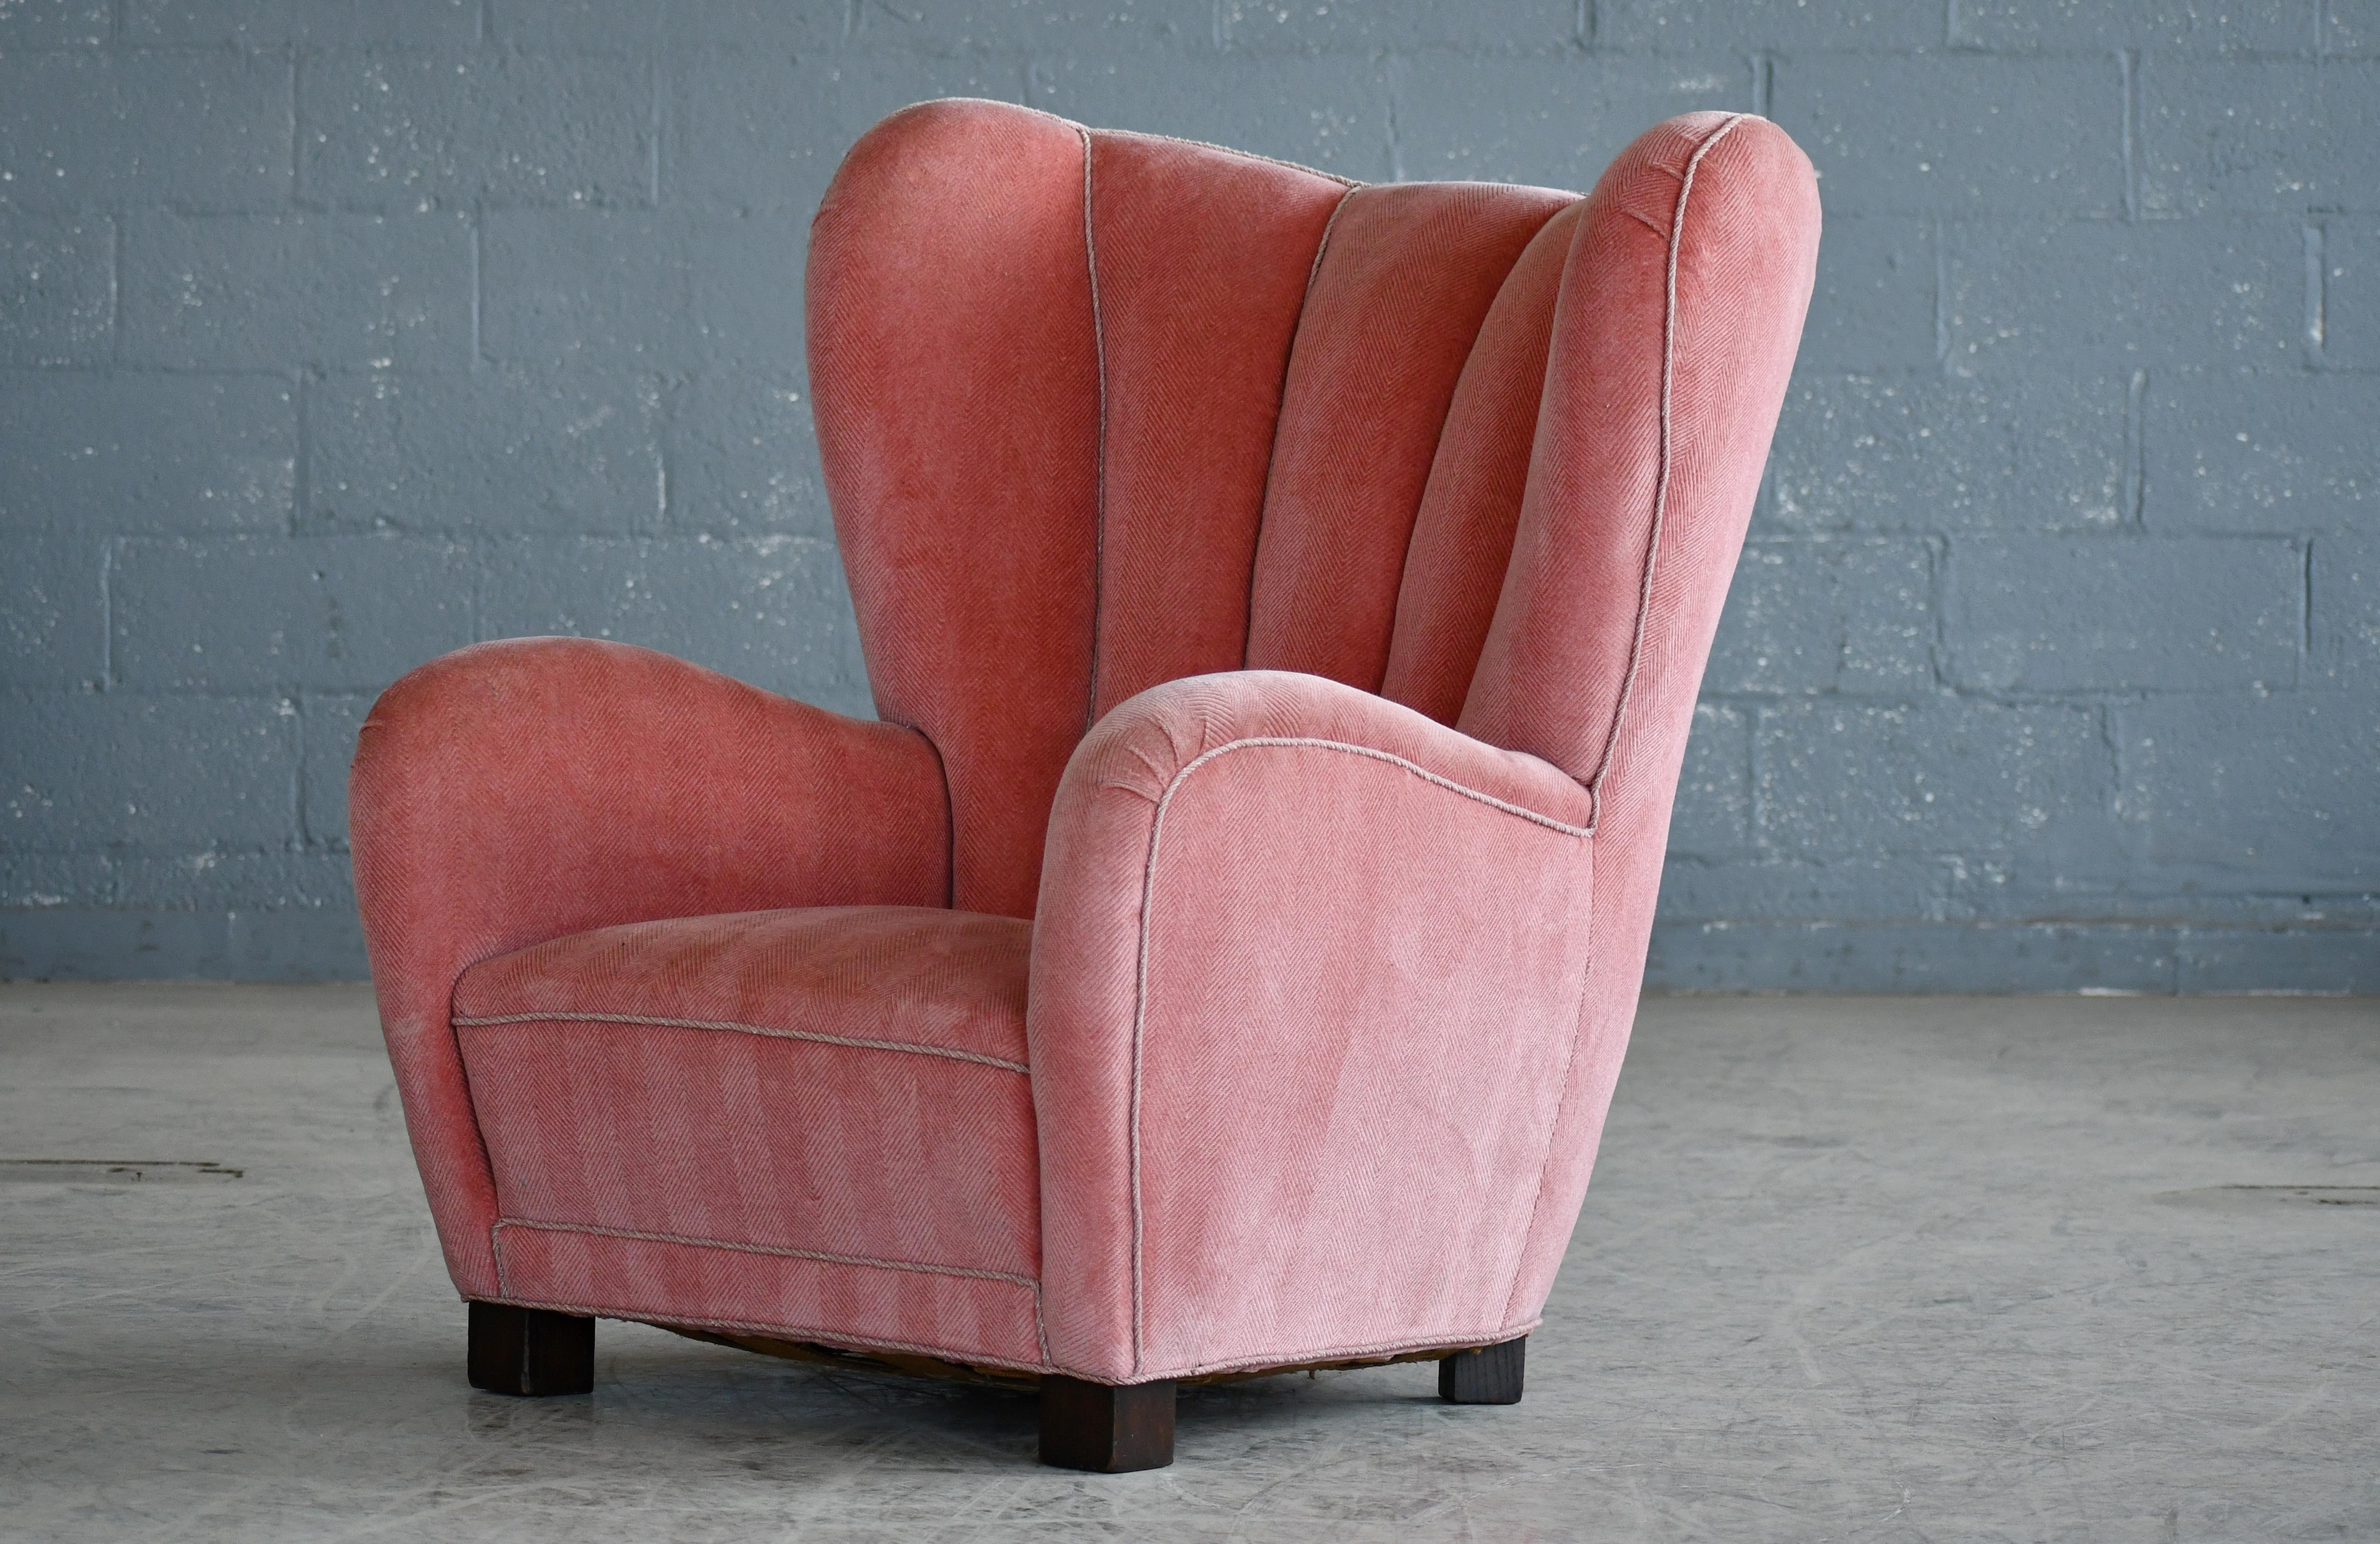 Large Danish 1940's Channelback Lounge Chair in Pink Mohair Round Organic Shape For Sale 2